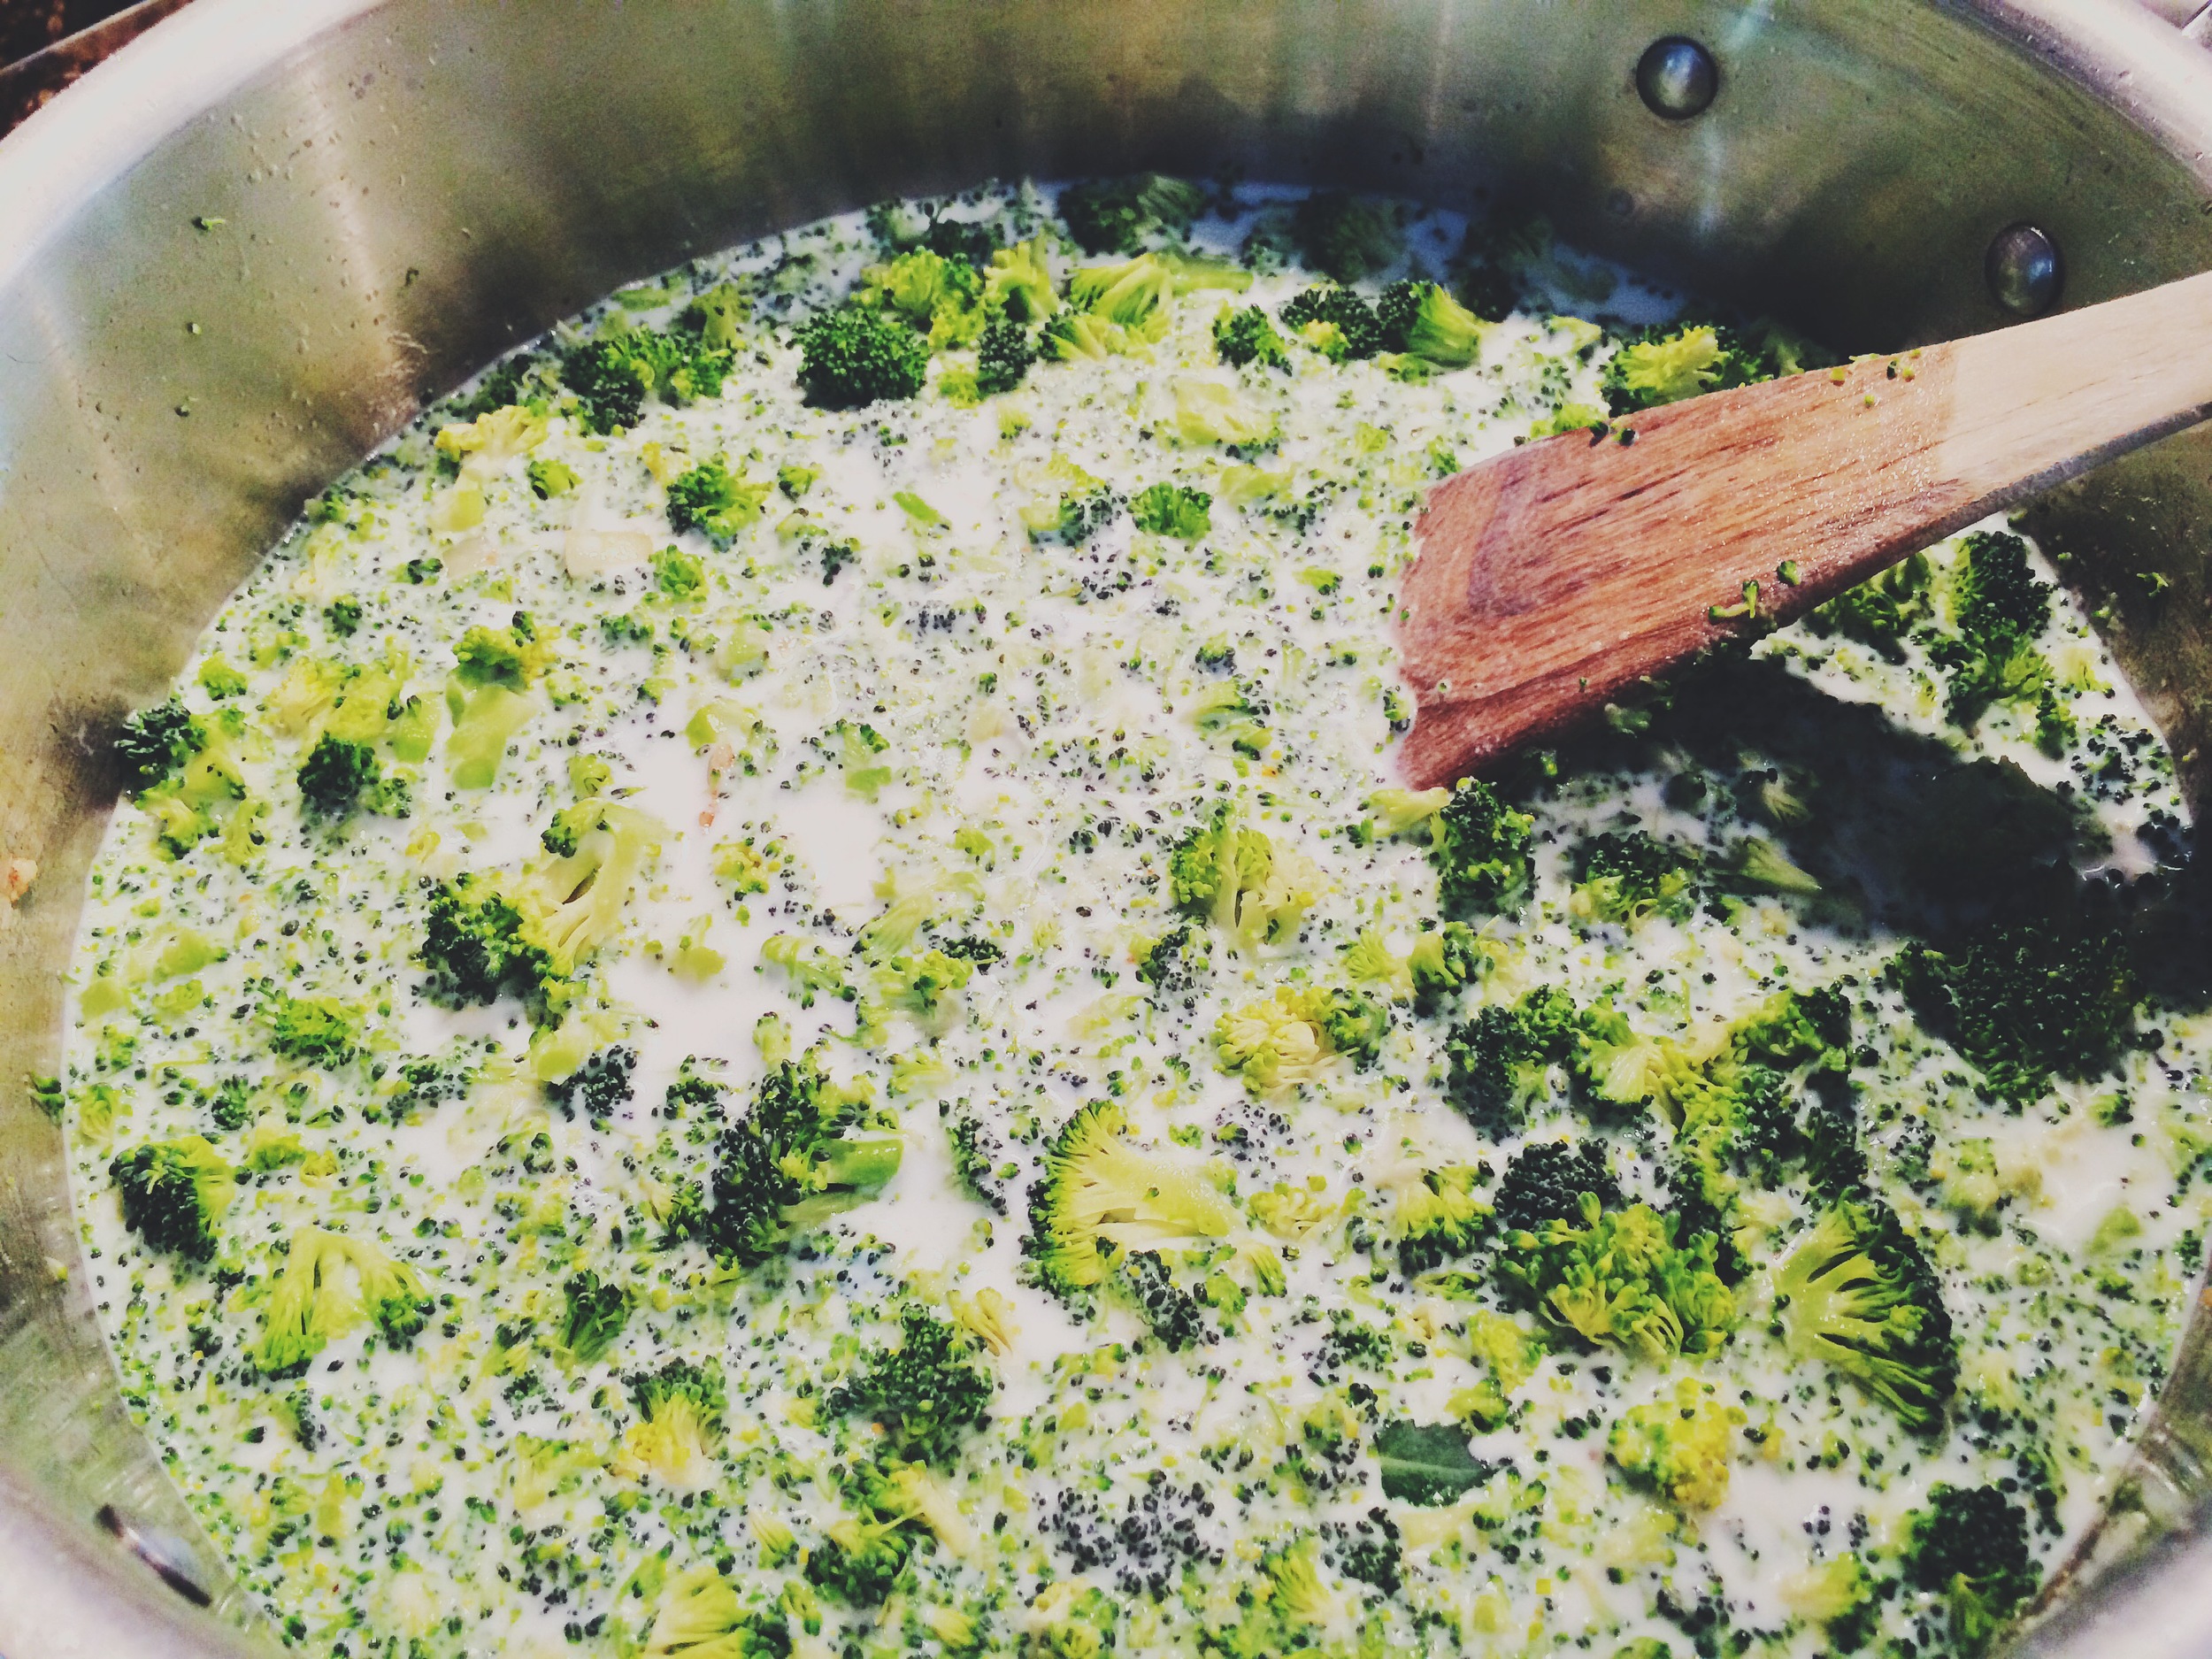  Add the broccoli, half &amp; half, and milk to the paste and stir together. Bring to a simmer, cover, and cook for 15-20min.&nbsp; 